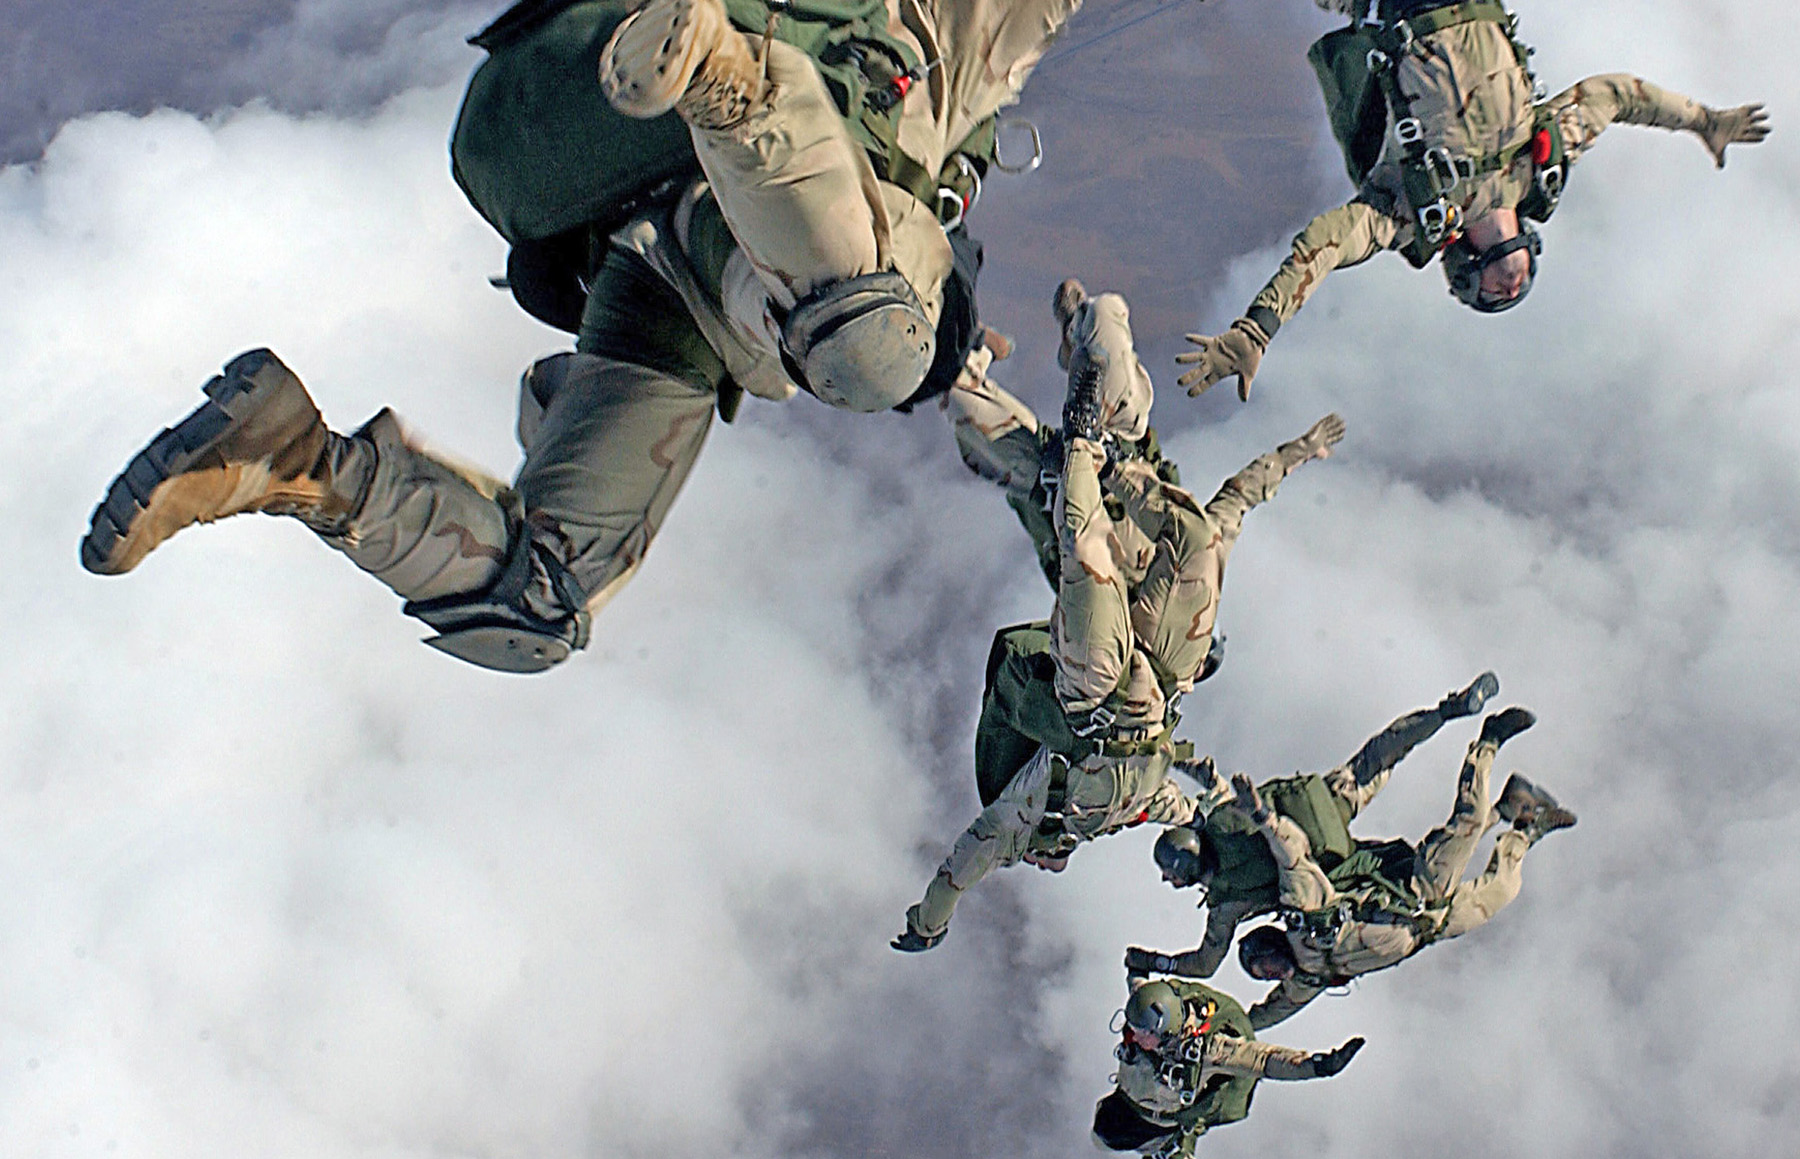 Stock Photography: Military Skydivers Jumping From a Plane